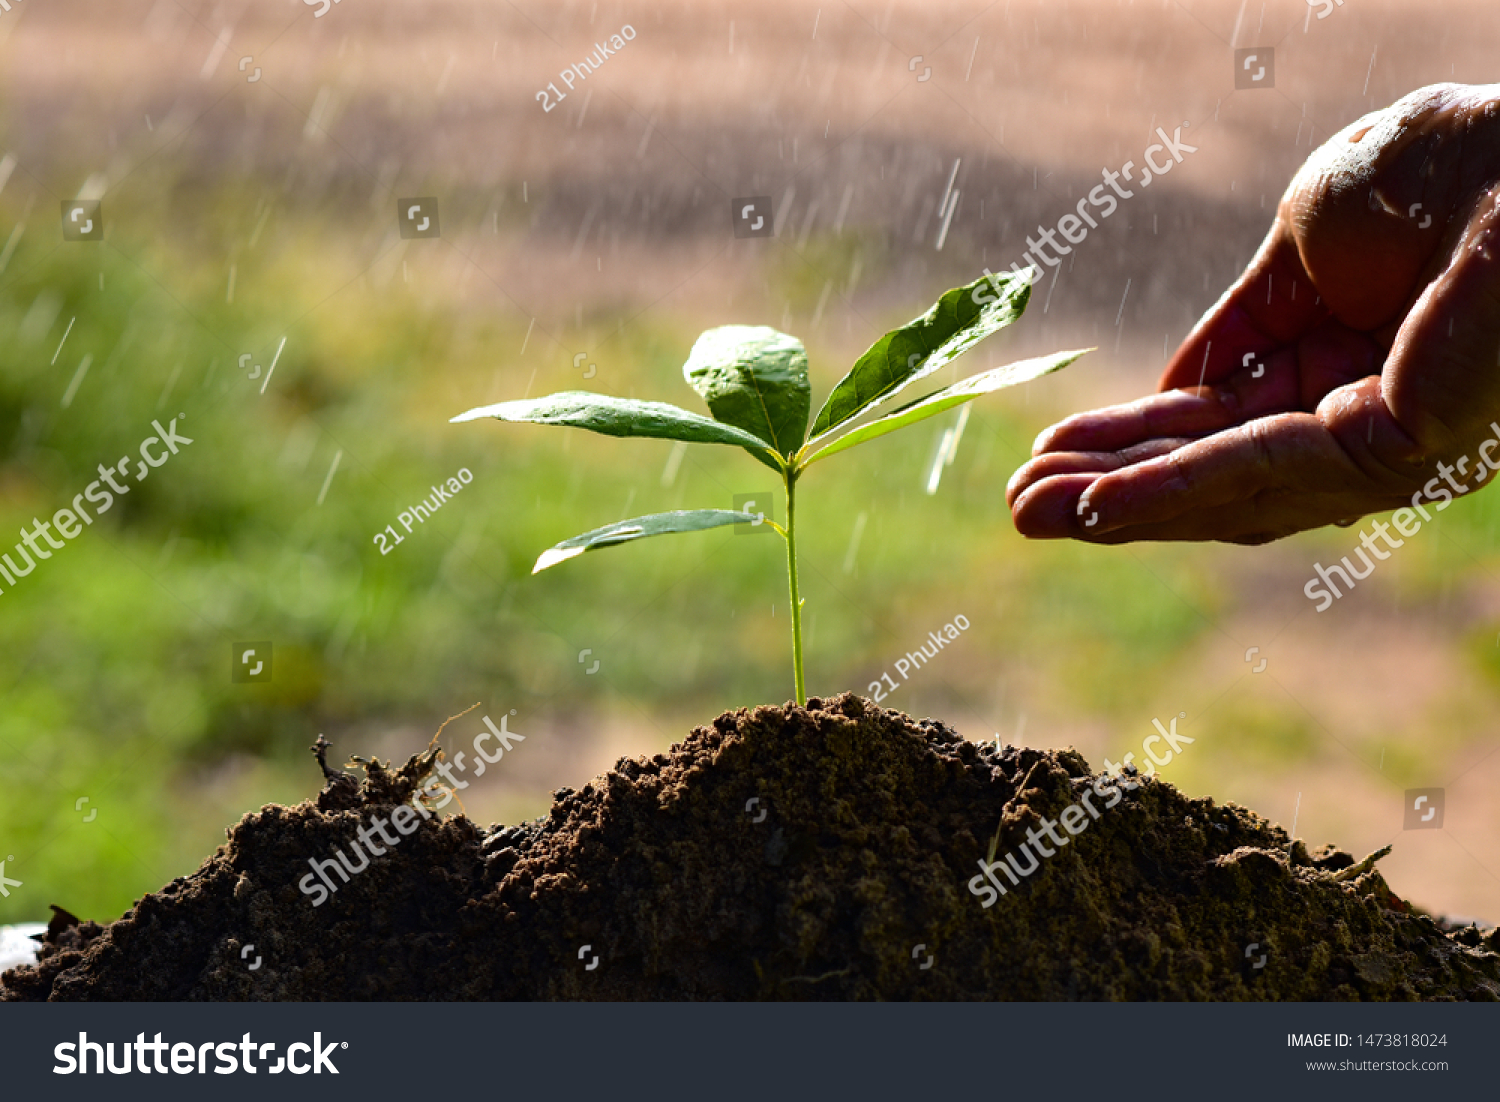 Hand of watering the soil of trees and Care tree planting and saving the planet to deduct global warming #1473818024